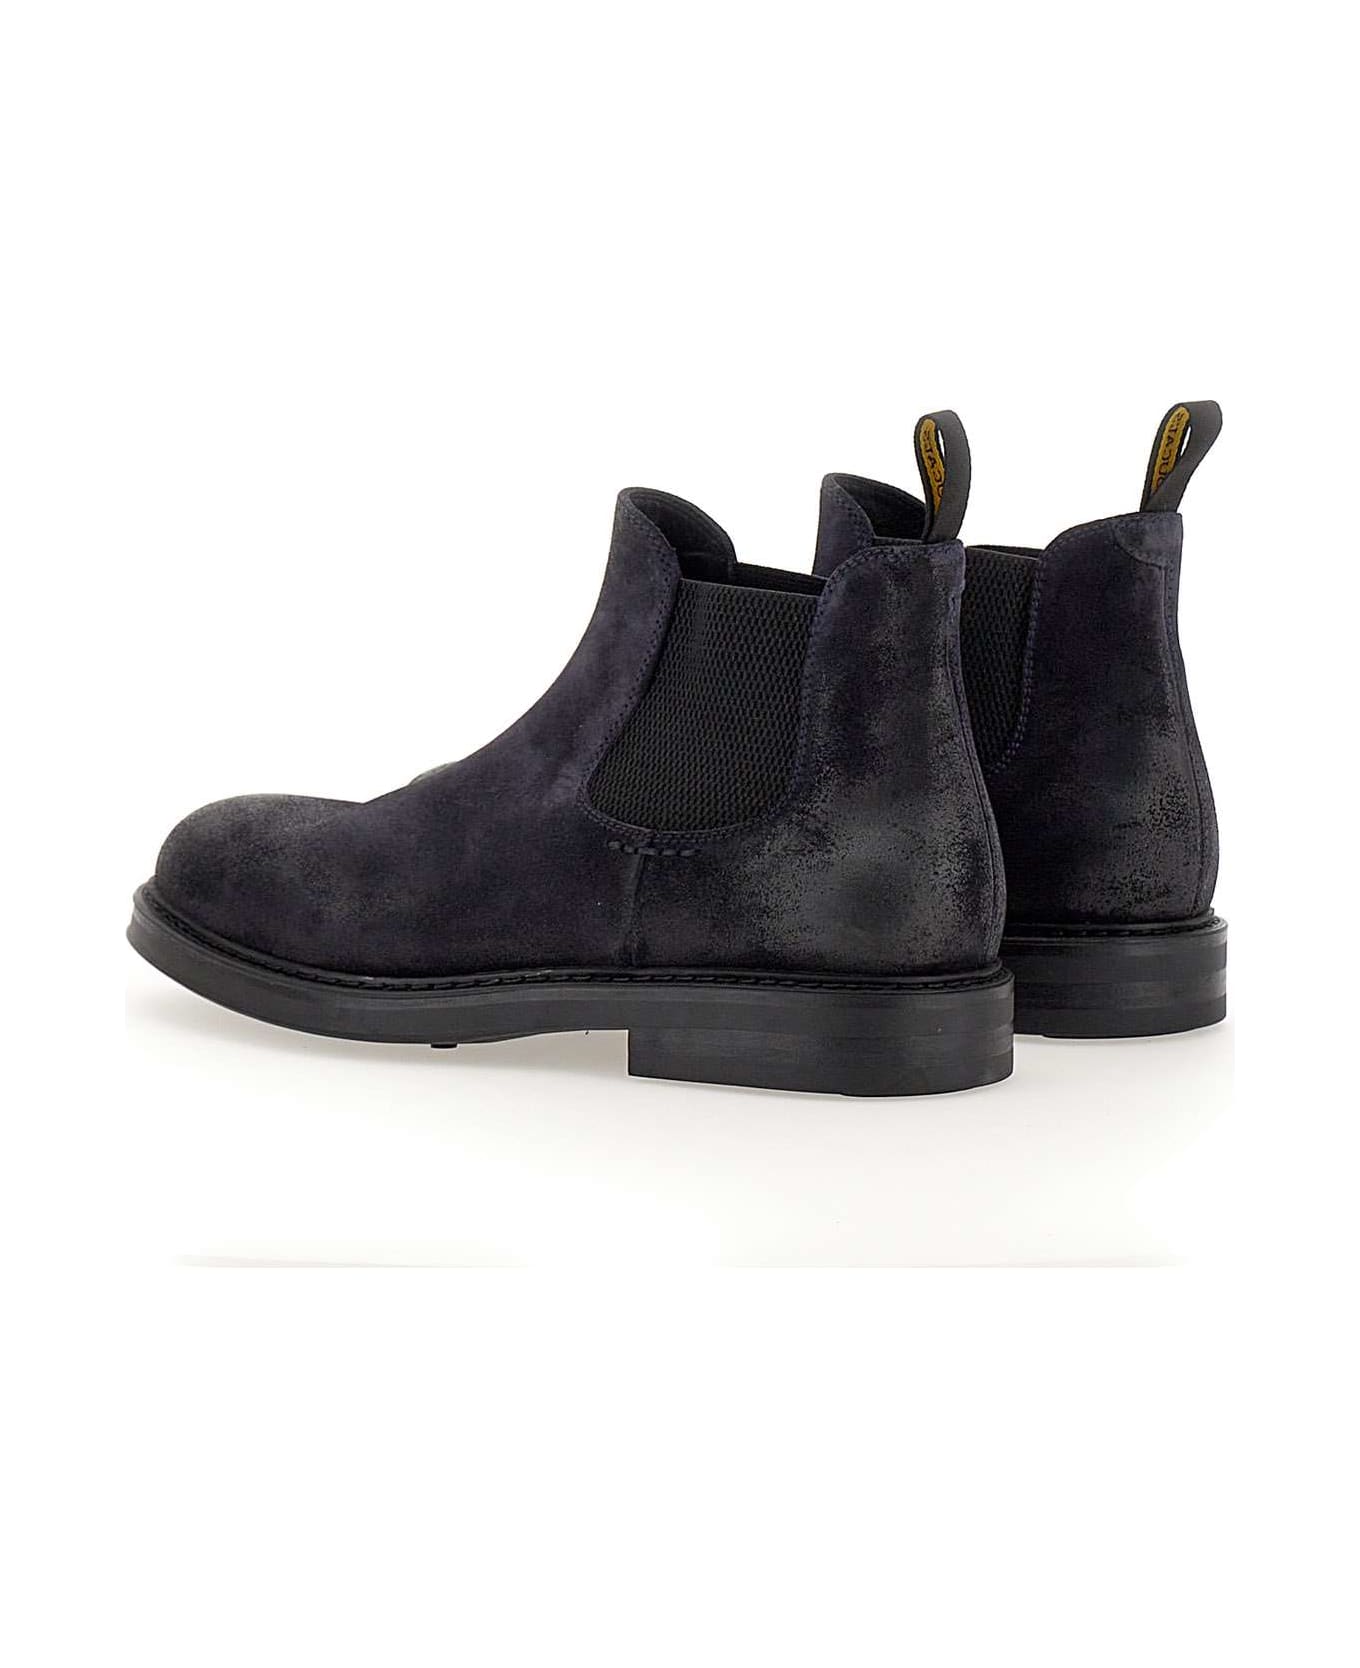 Doucal's "oil" Ankle Boot In Suede - BLUE ブーツ